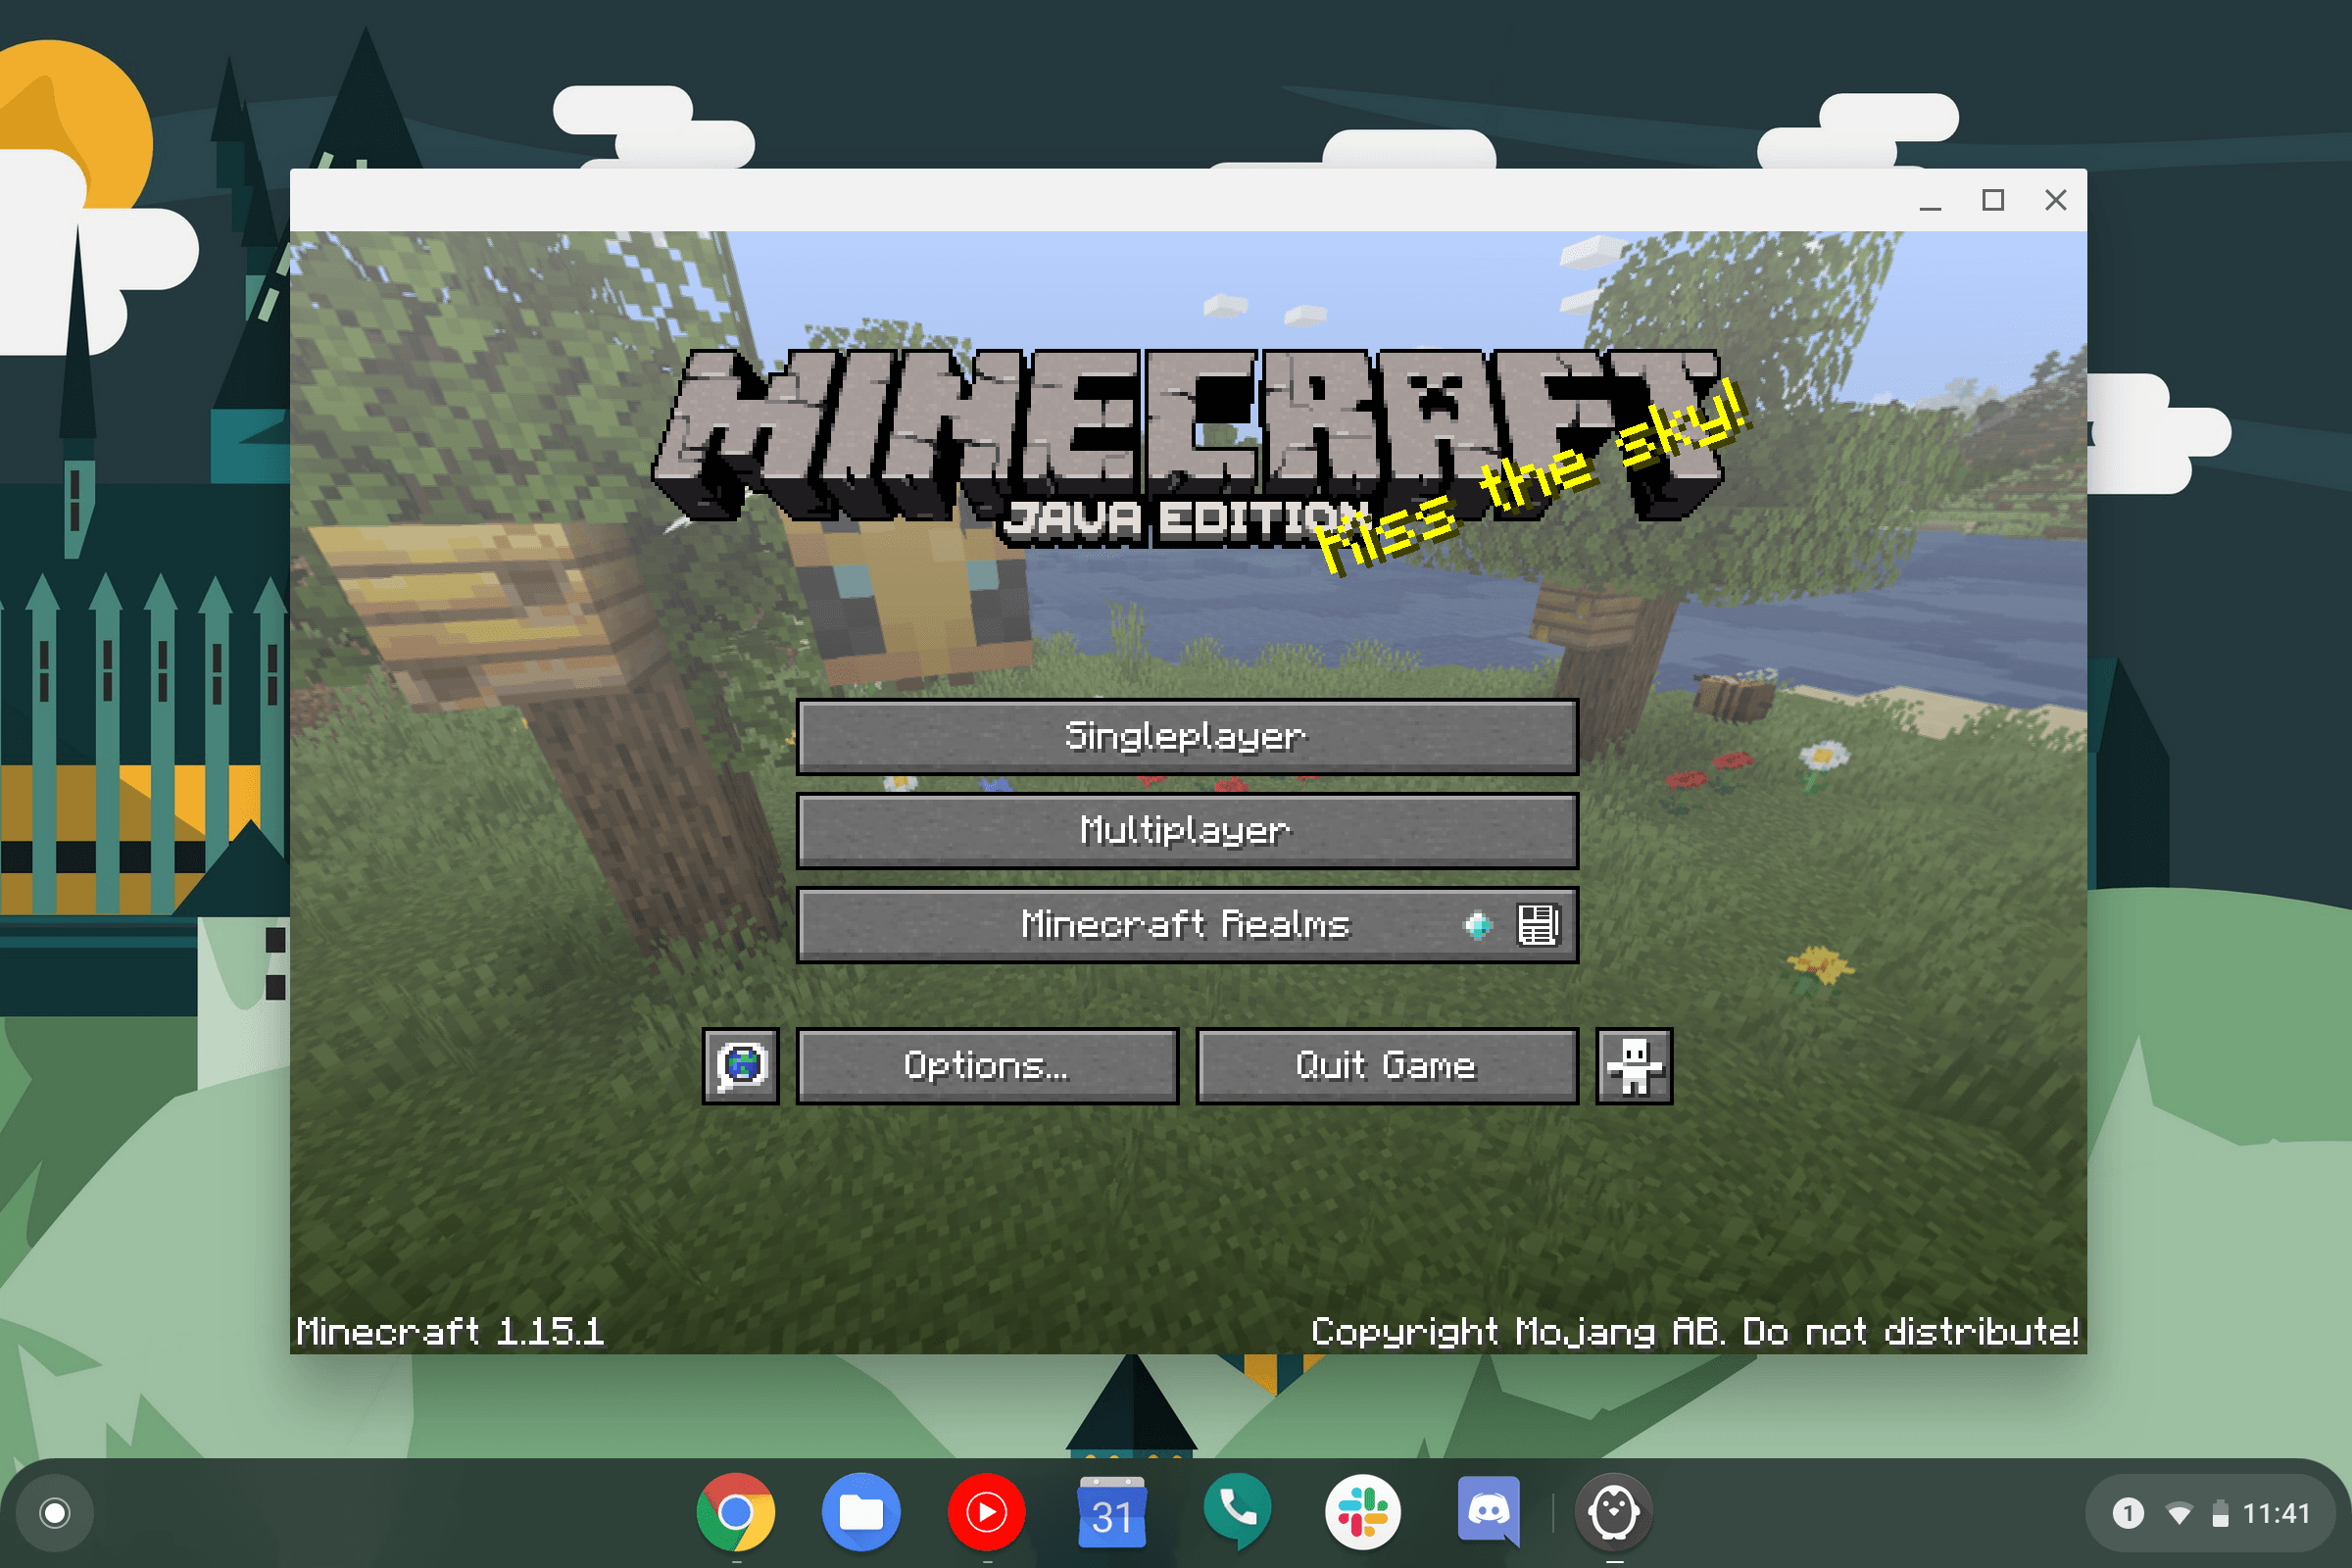 How to install Minecraft Java Edition on a Chromebook